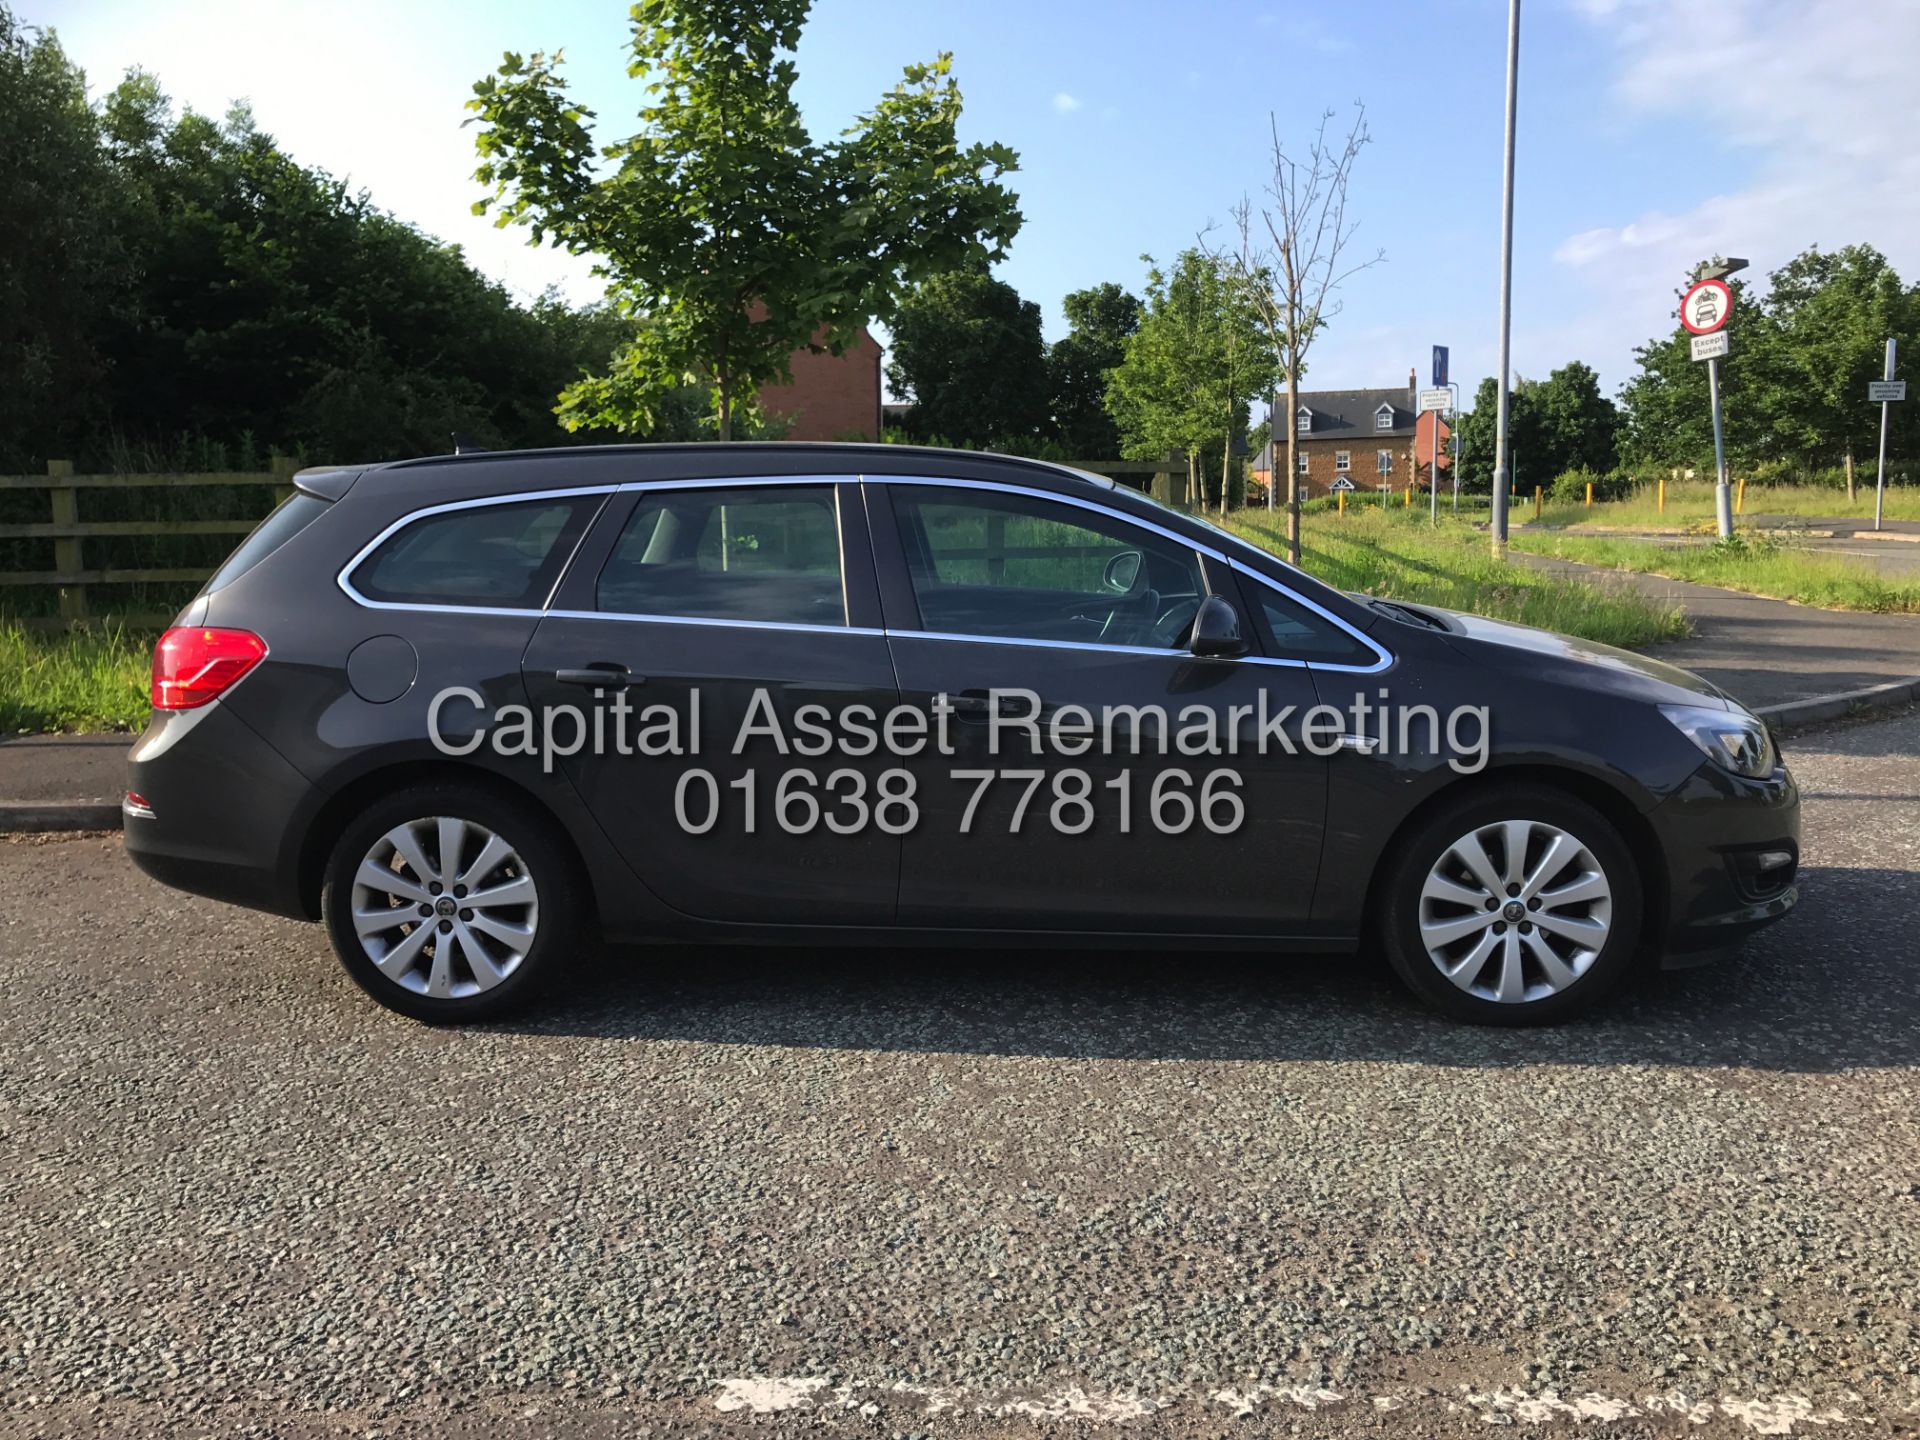 On Sale VAUXHALL ASTRA 1.3CDTI "TECH LINE" ESTATE (2013 MODEL) 1 OWNER WITH HISTORY SAT NAV AIR CON - Image 10 of 20